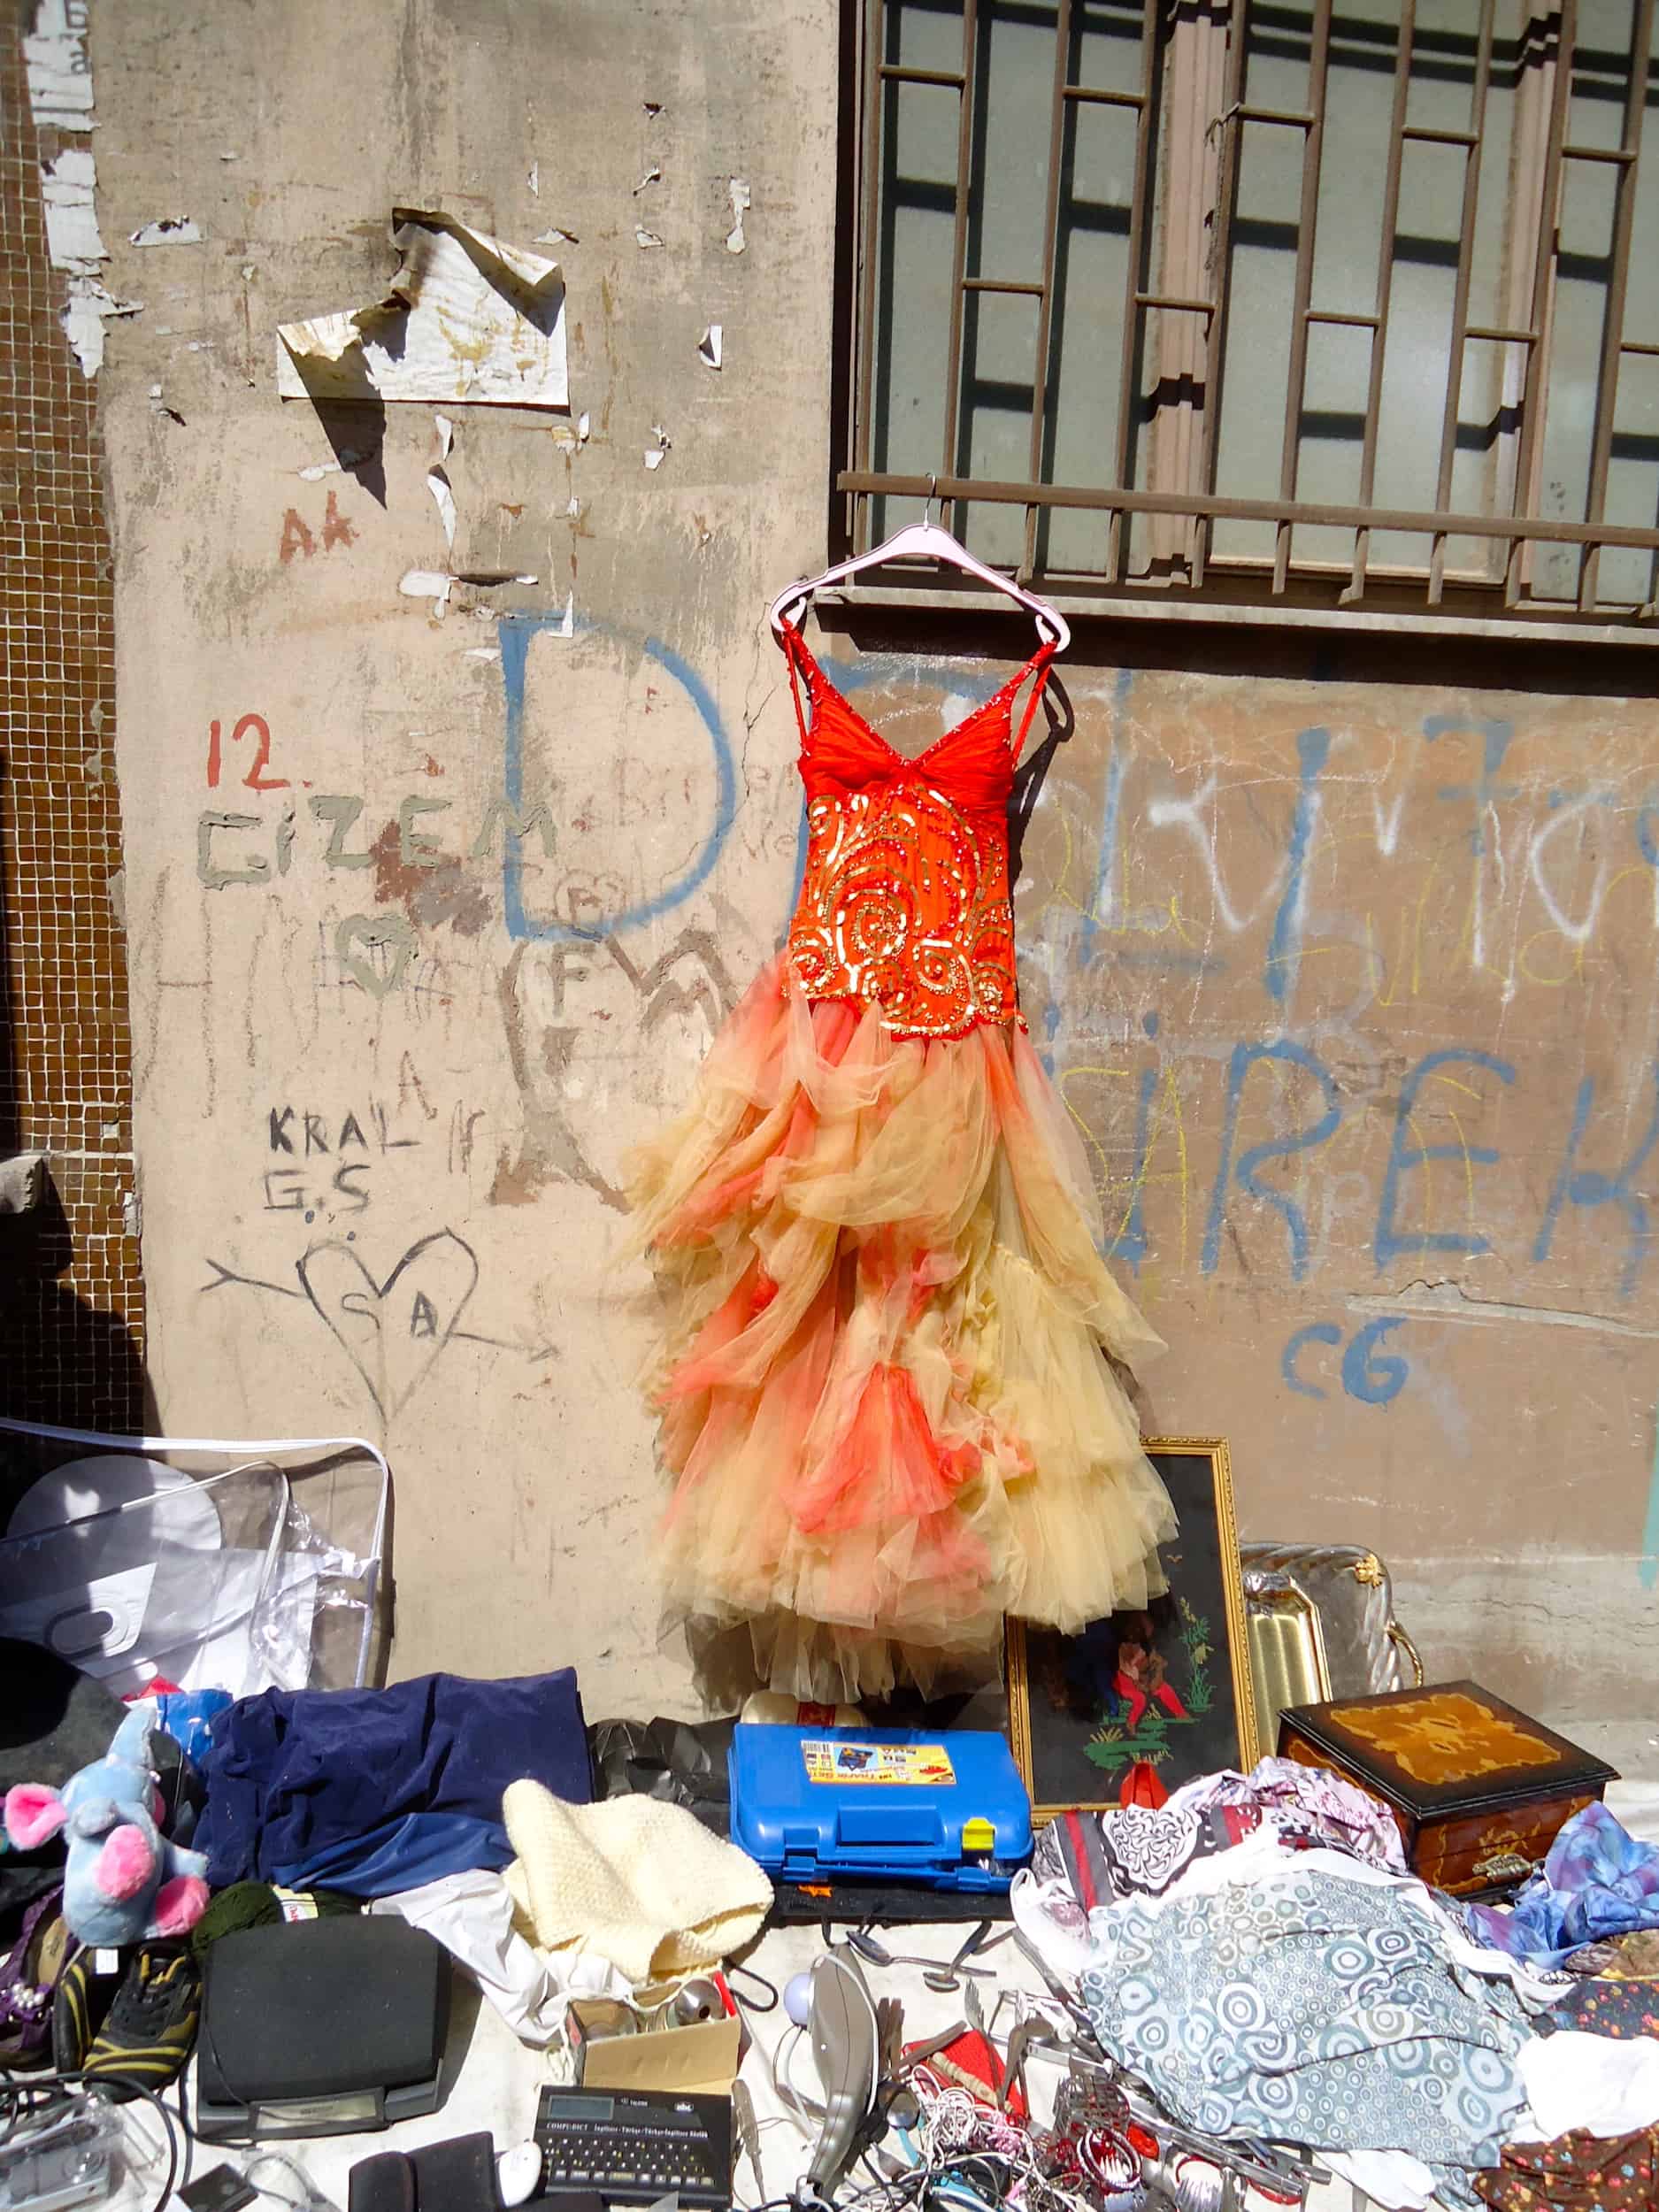 An ugly dress and other junk at the flea market in Dolapdere, Istanbul, Turkey